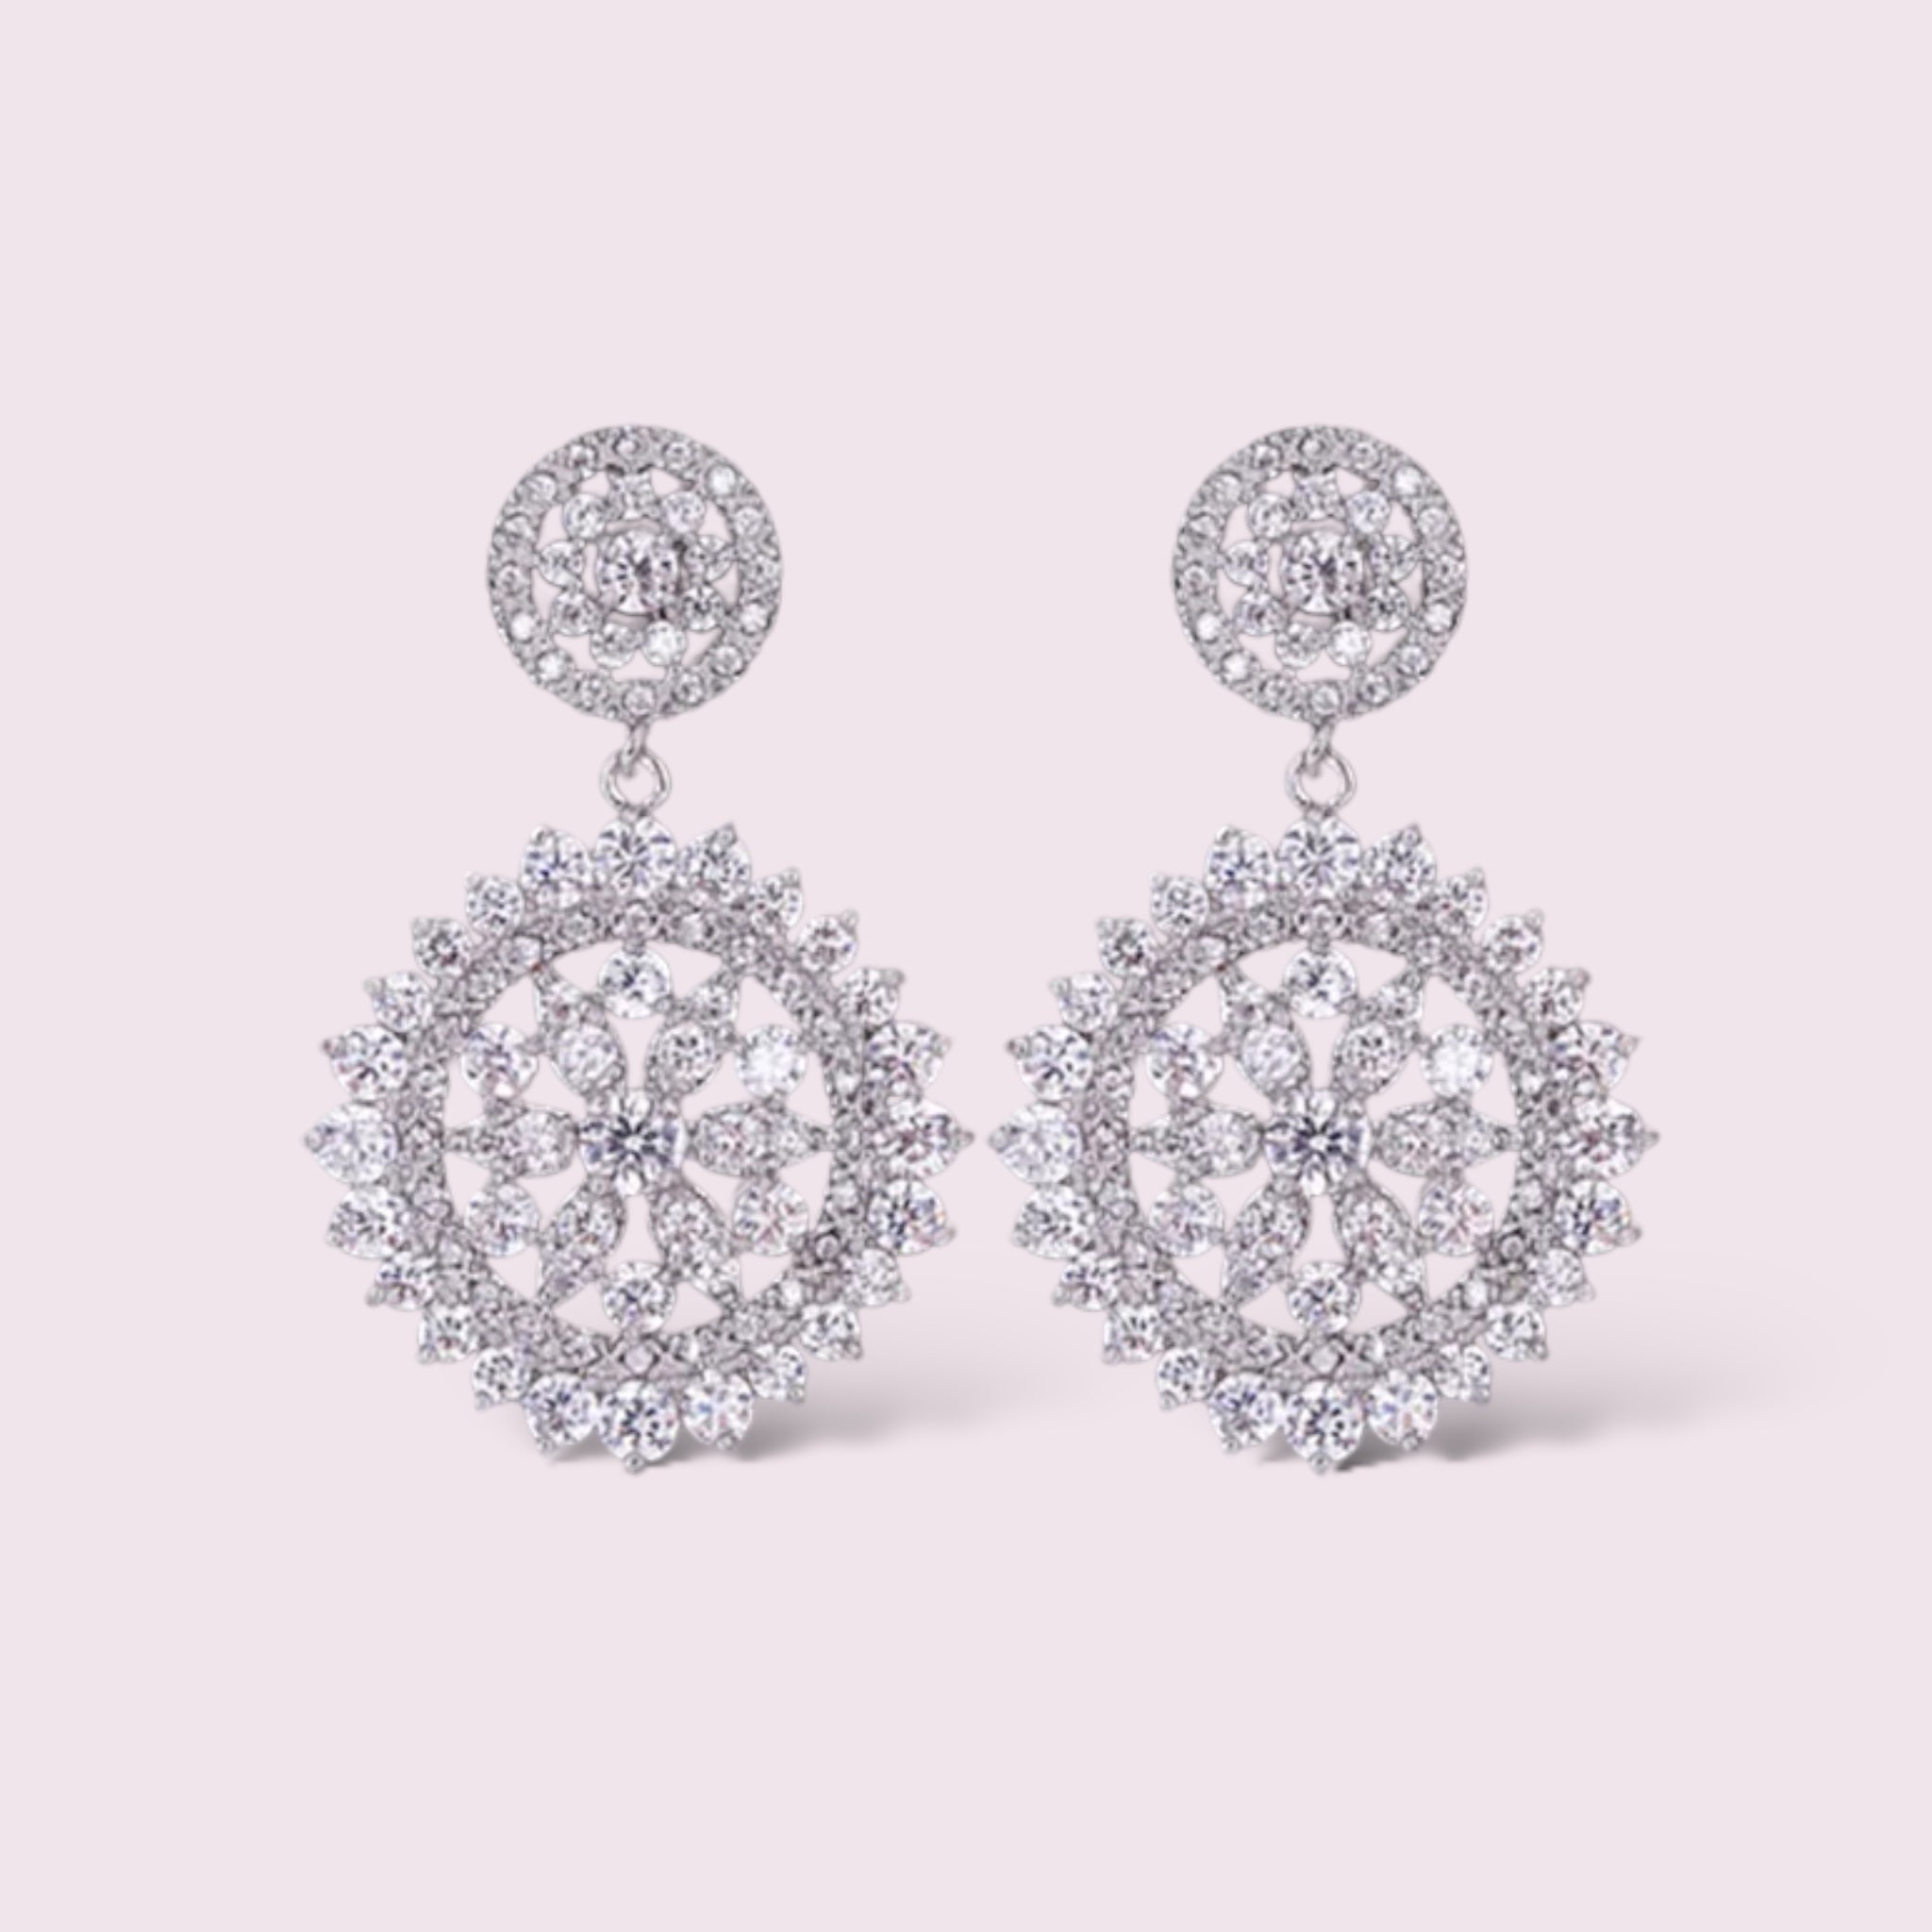 Floral CZ micro pave drop wedding earrings, Wedding Jewelry, Bridal, Bridesmaids